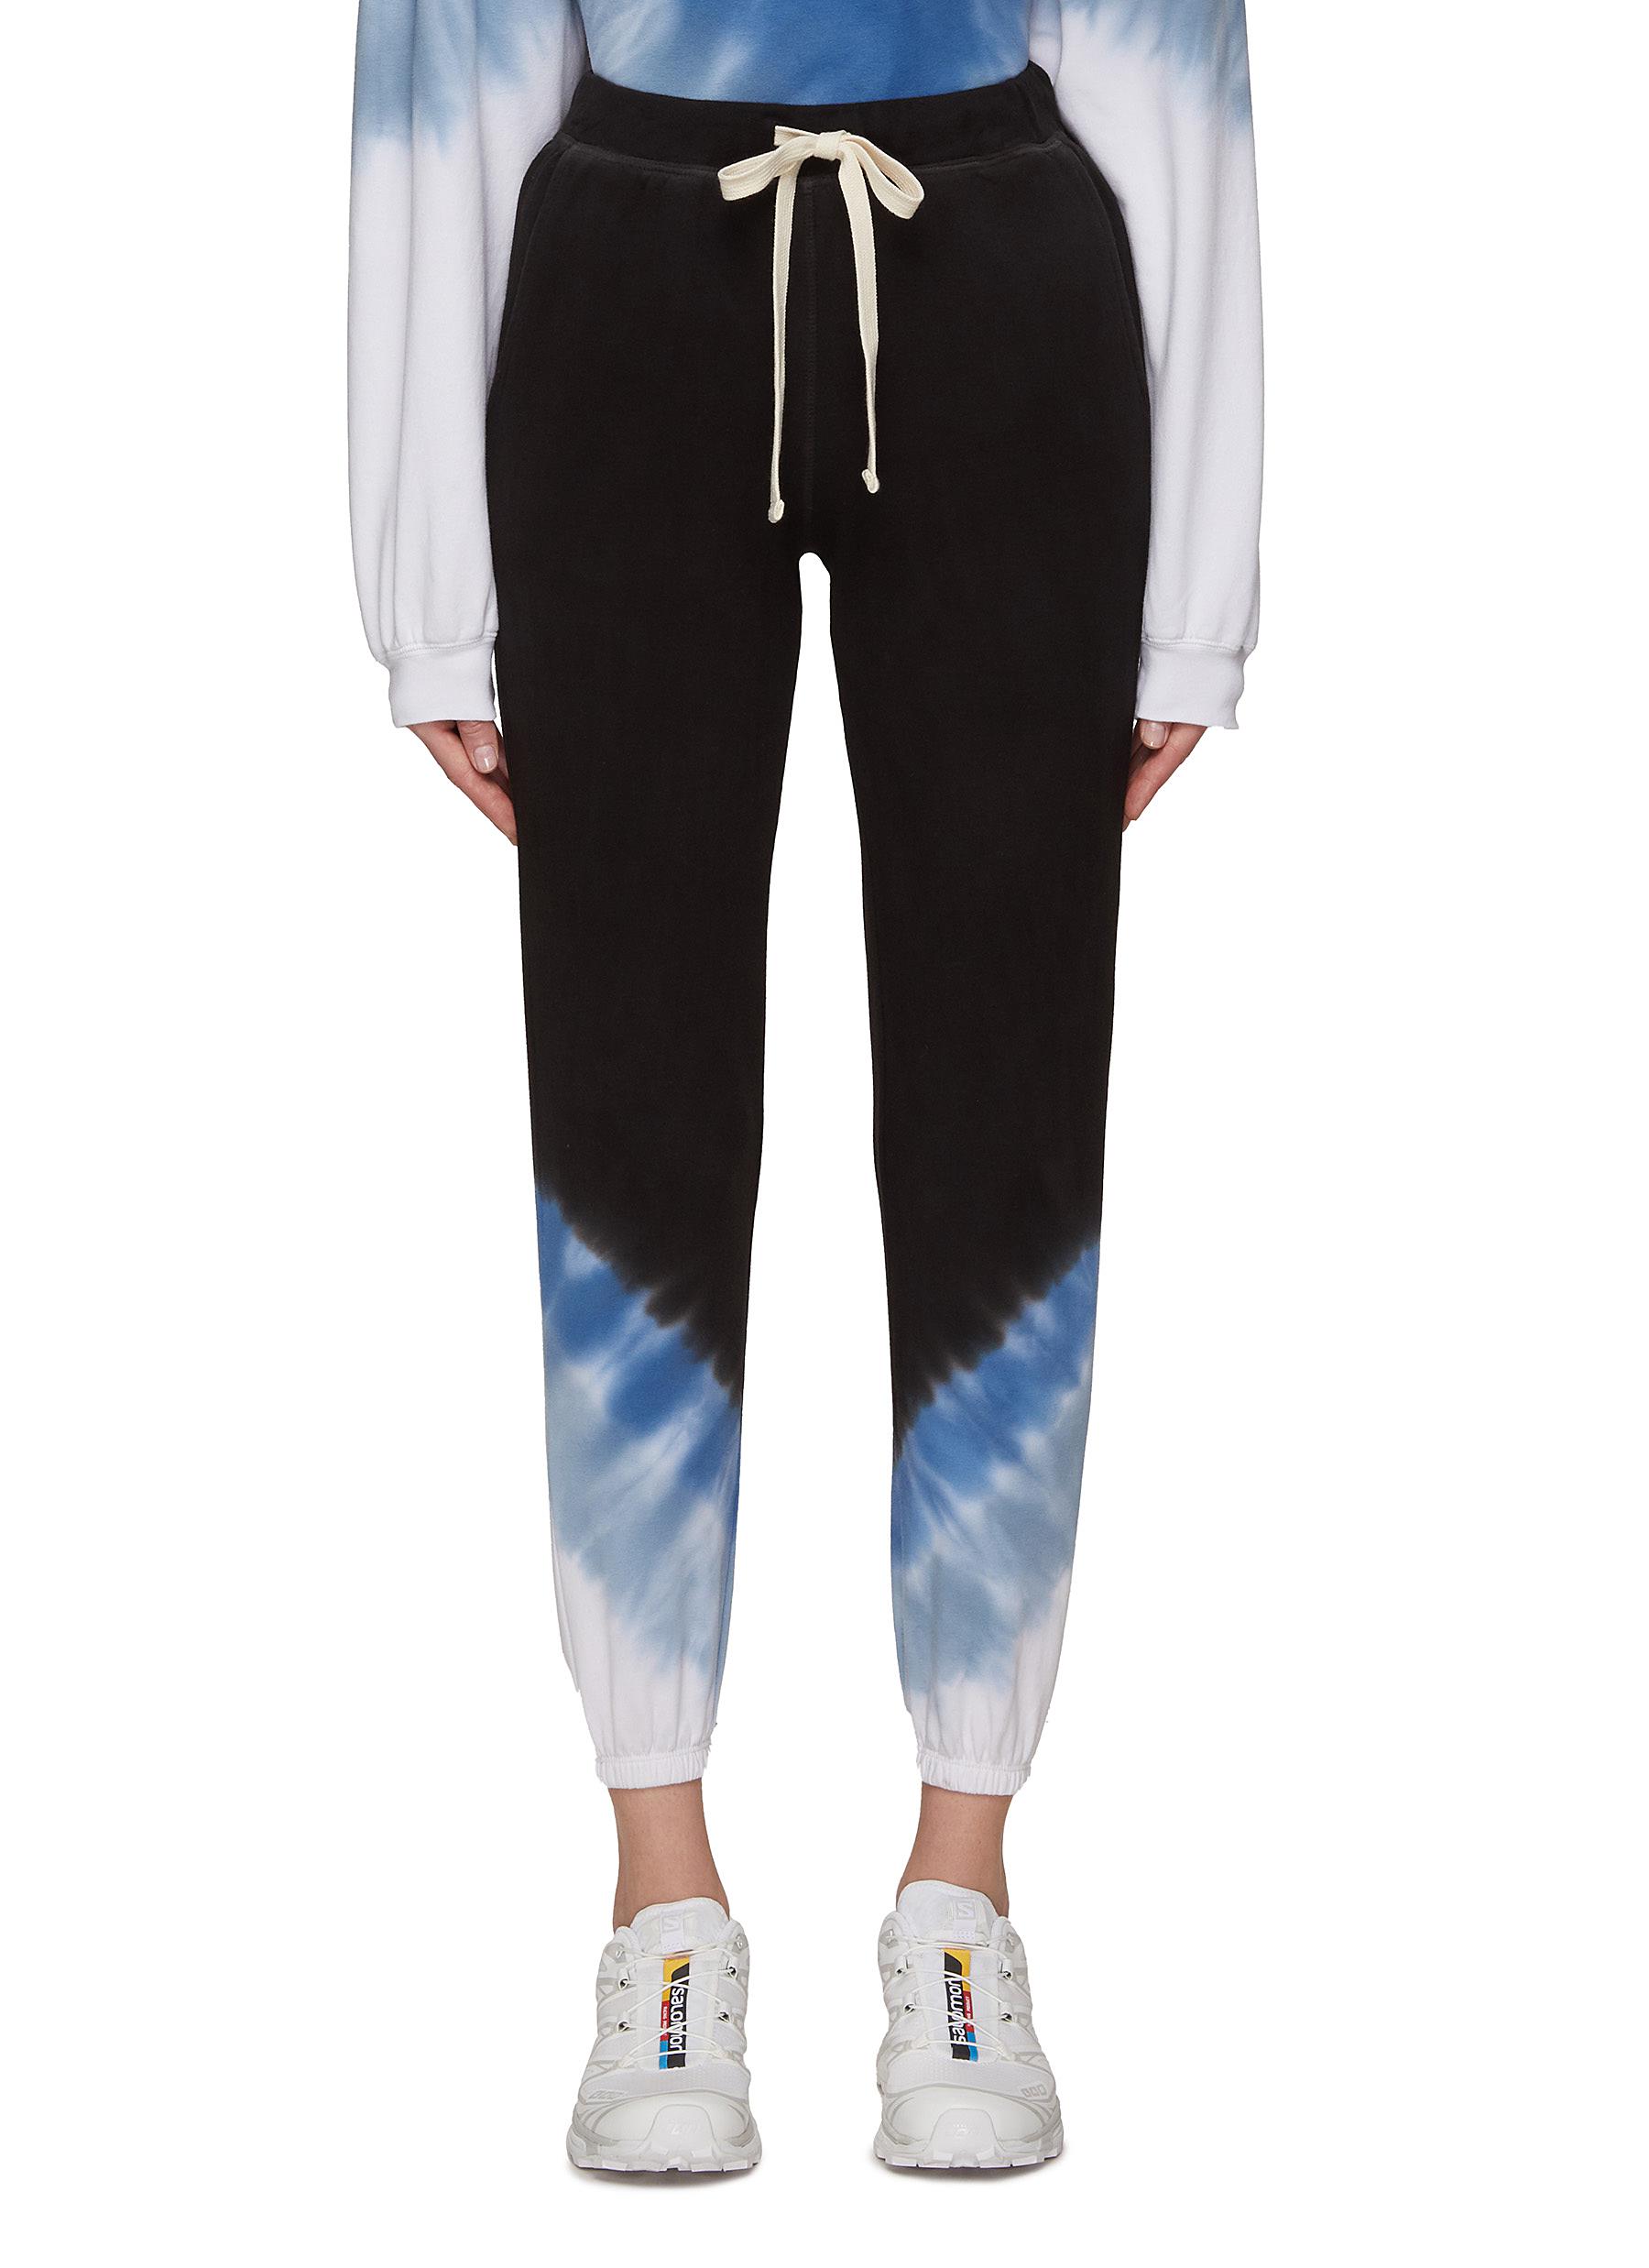 ELECTRIC & ROSE ‘Icon' Elasticated Cuff Tie Dye Print Jogger Pants